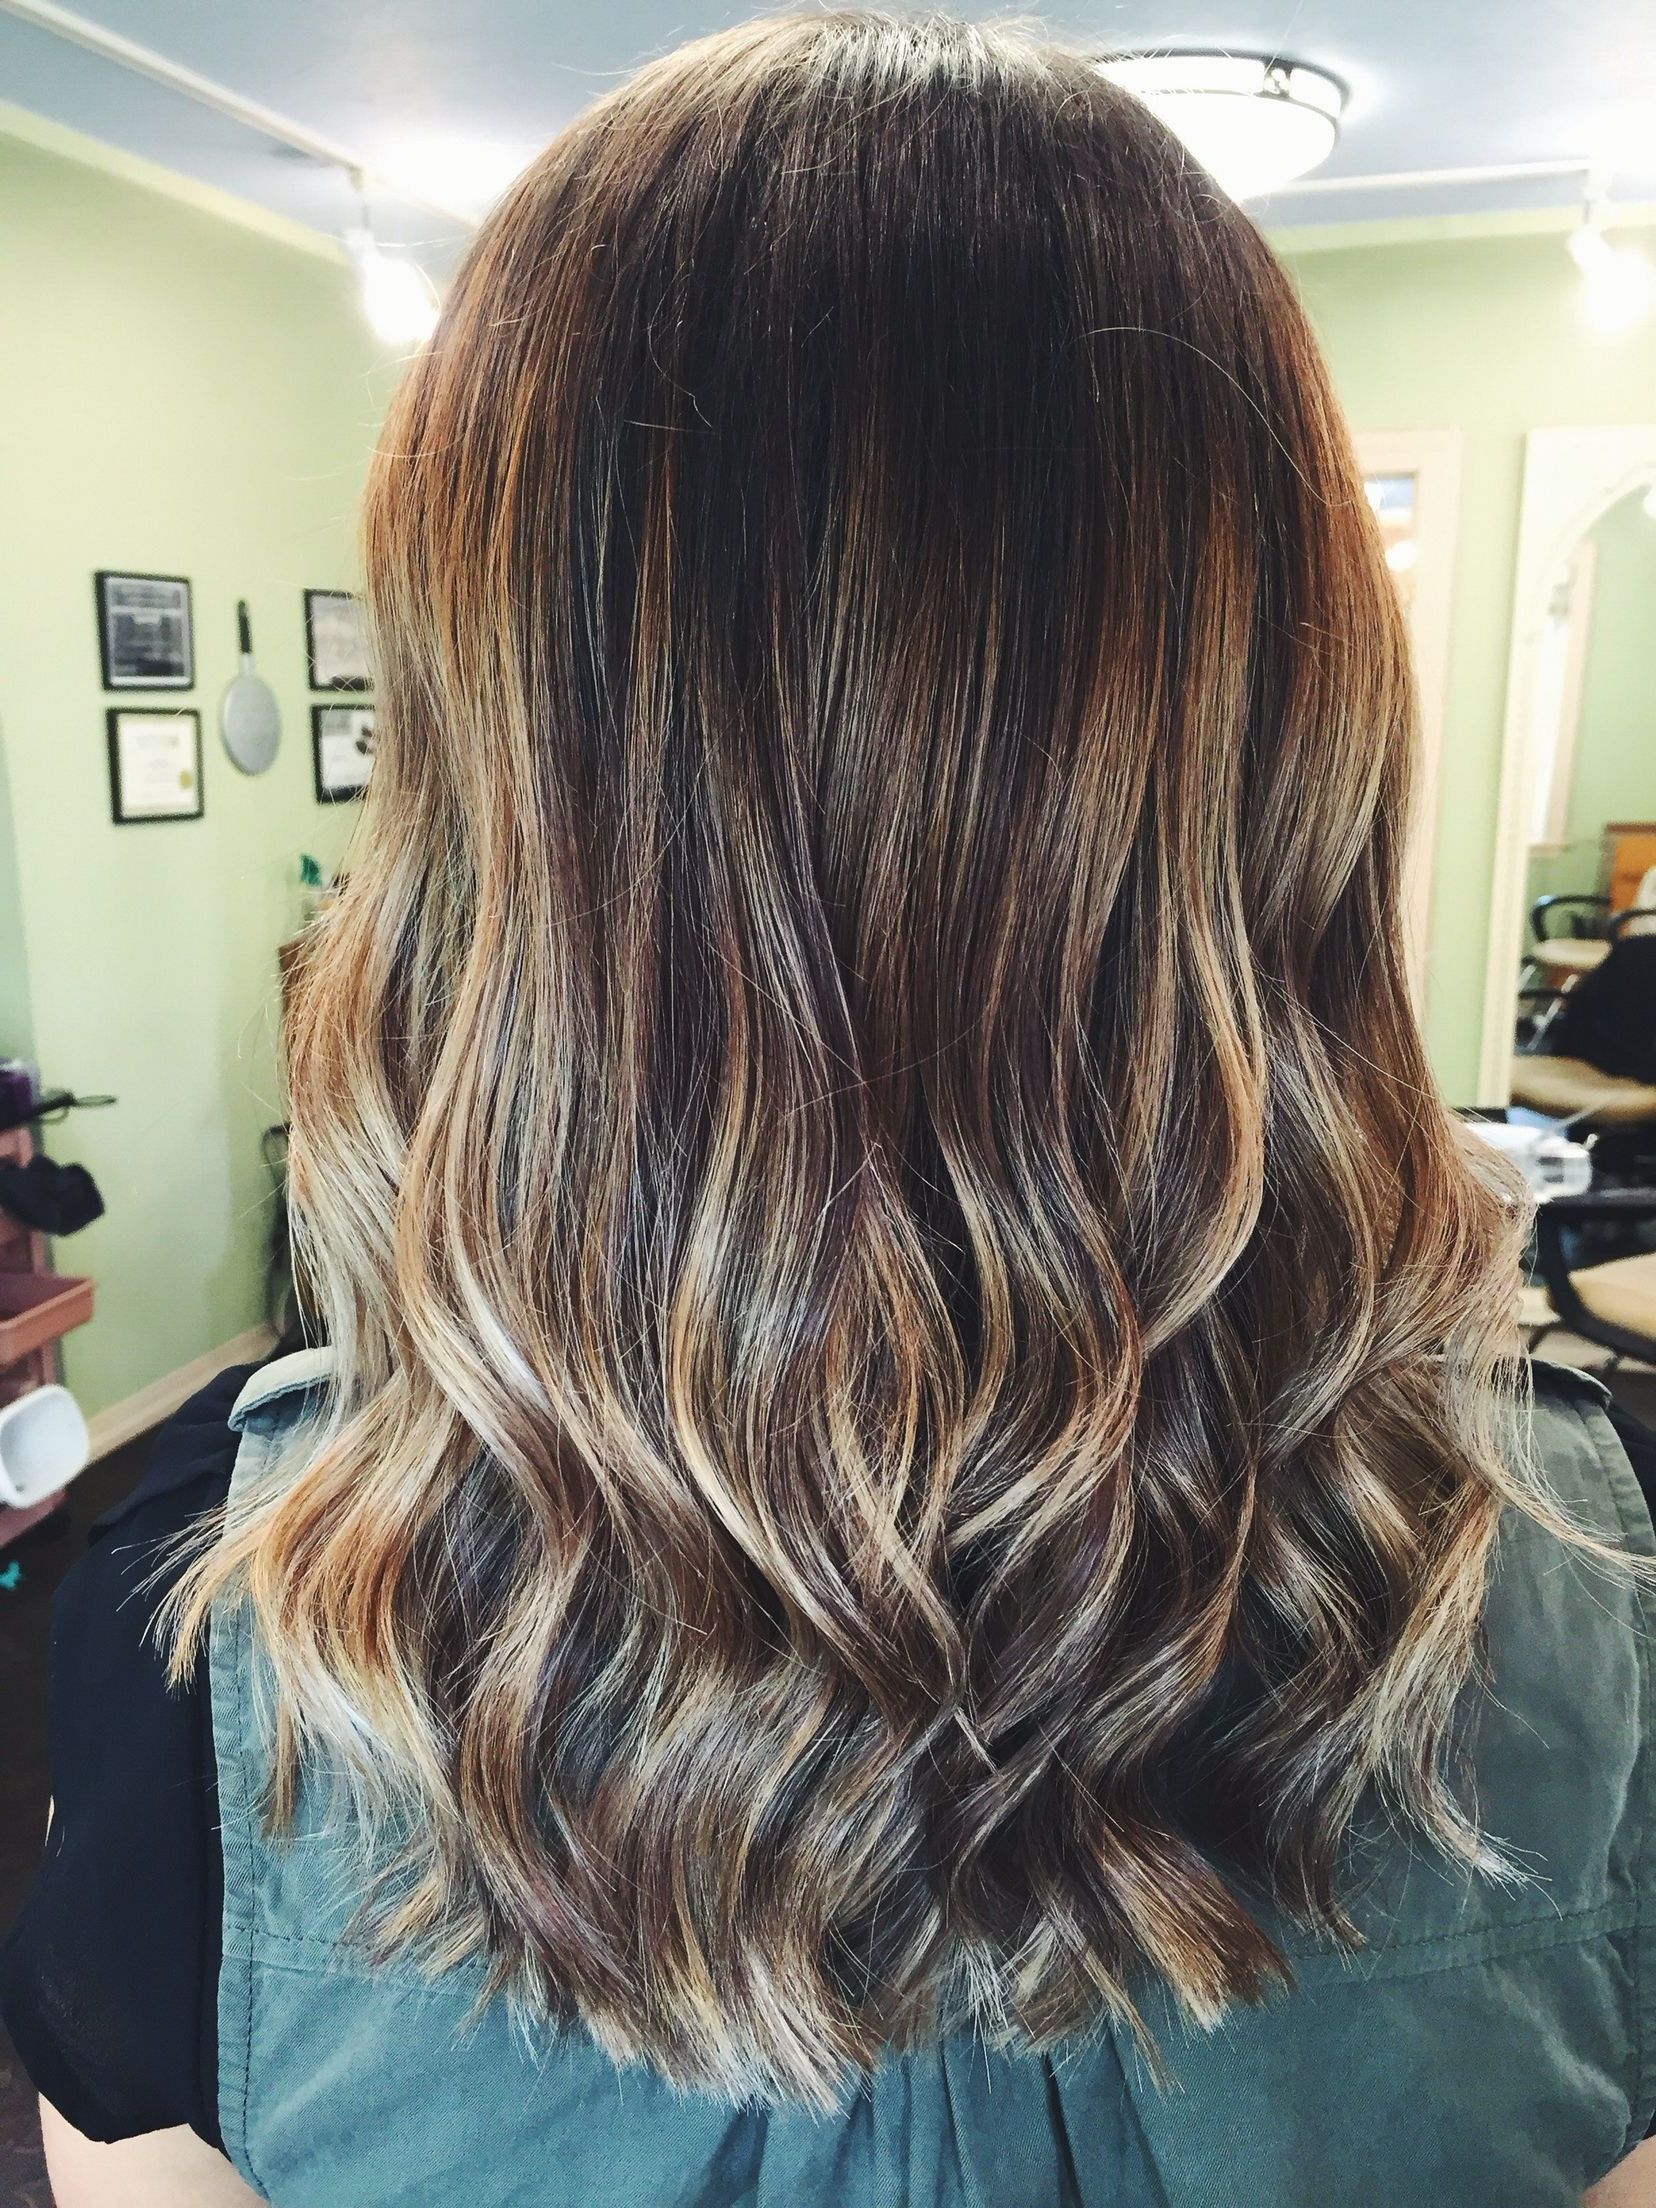 Trendy Dirty Blonde Hairstyles With Subtle Highlights Regarding Subtle Blonde Balayage Highlights For Brunettes (View 13 of 20)